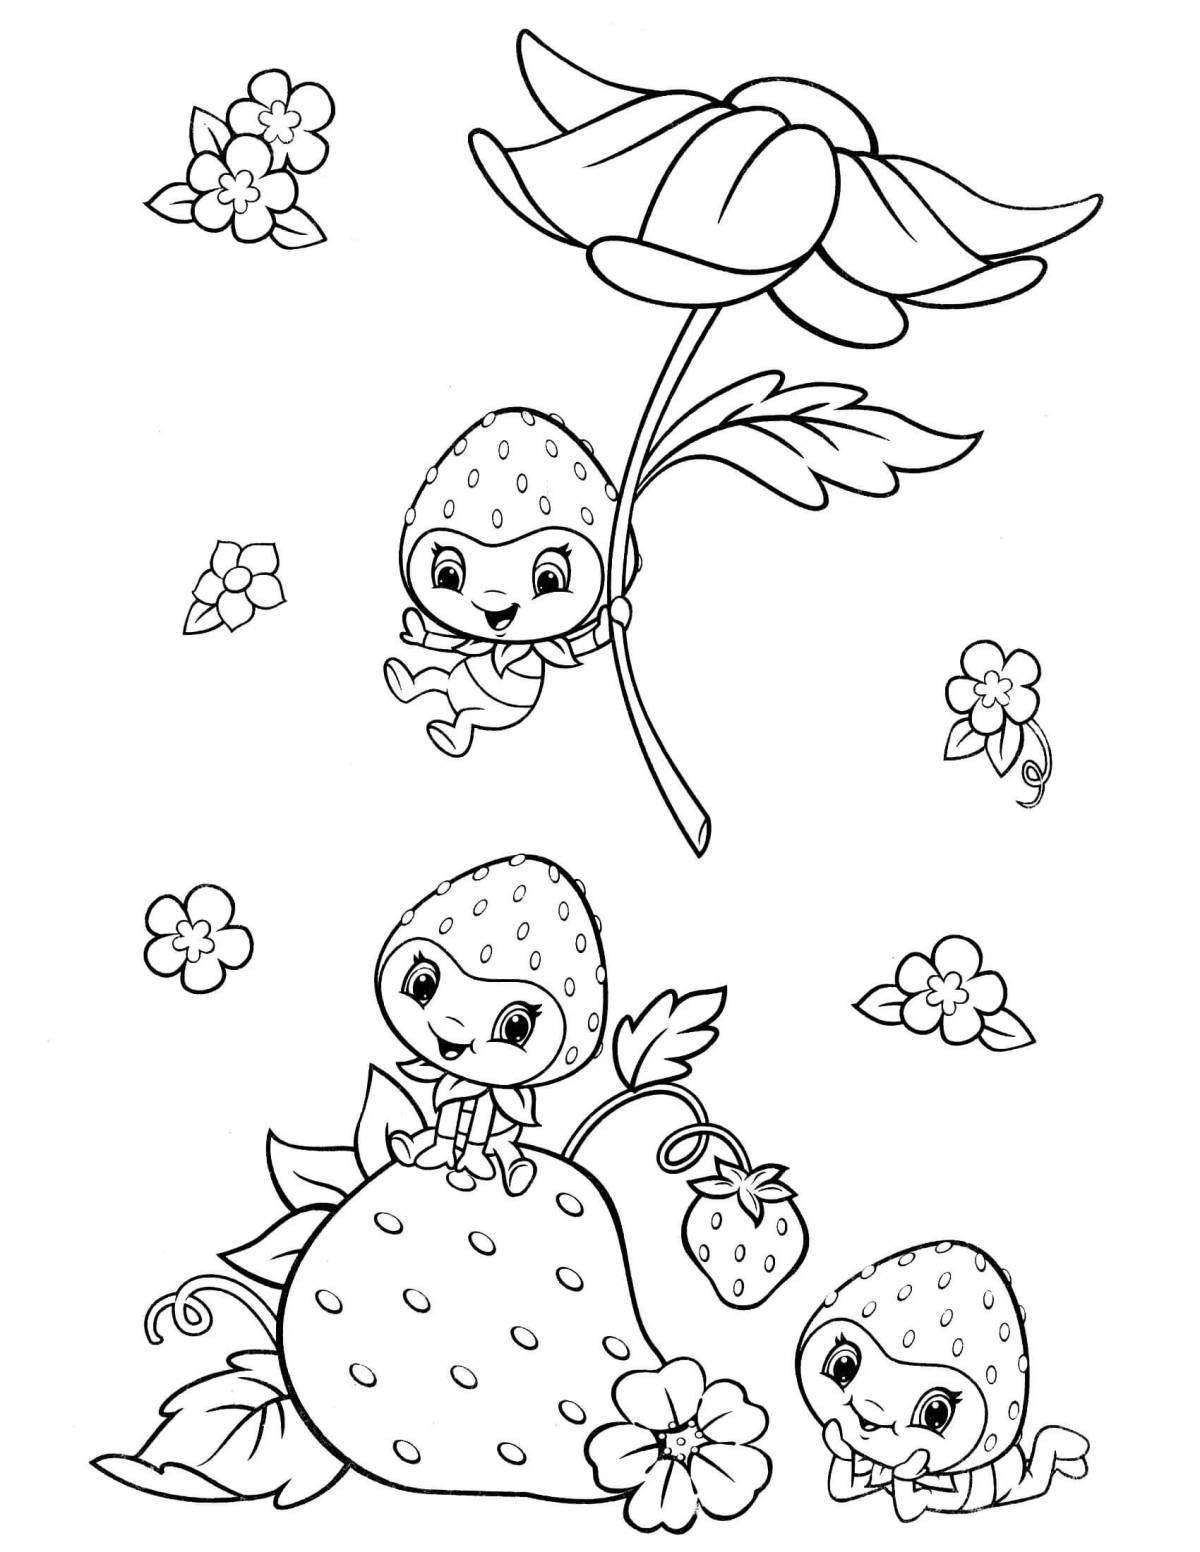 Strawberry glamor coloring book for girls